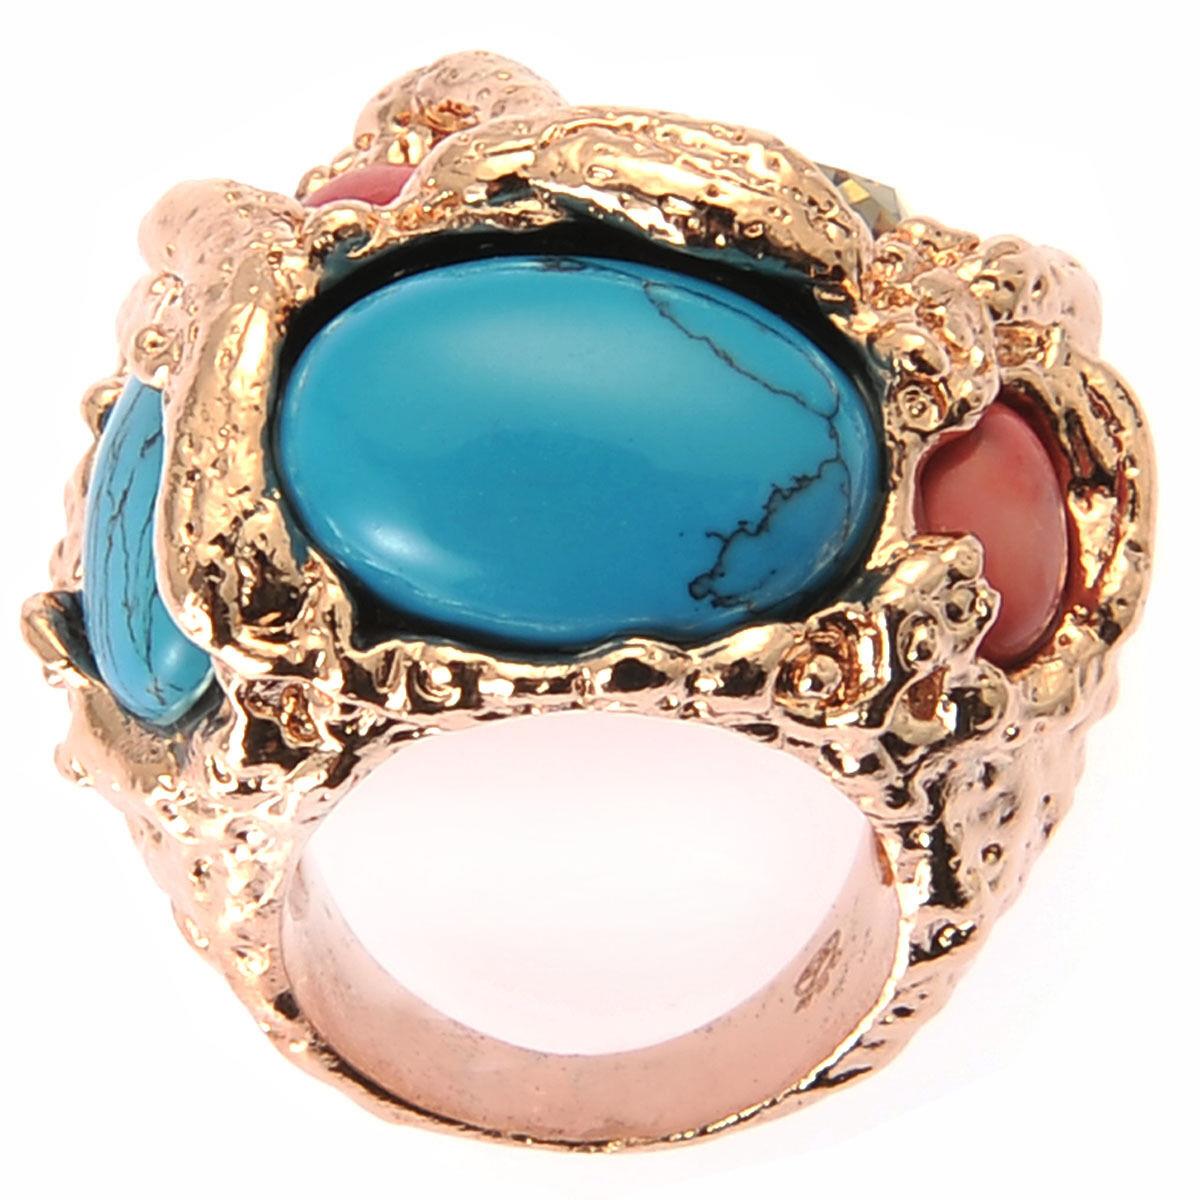 De Buman 18k Yellow Gold Plated or Rose Gold Plated Swarovski Turquoise Ring 18k Rose Goldplated, Size 8